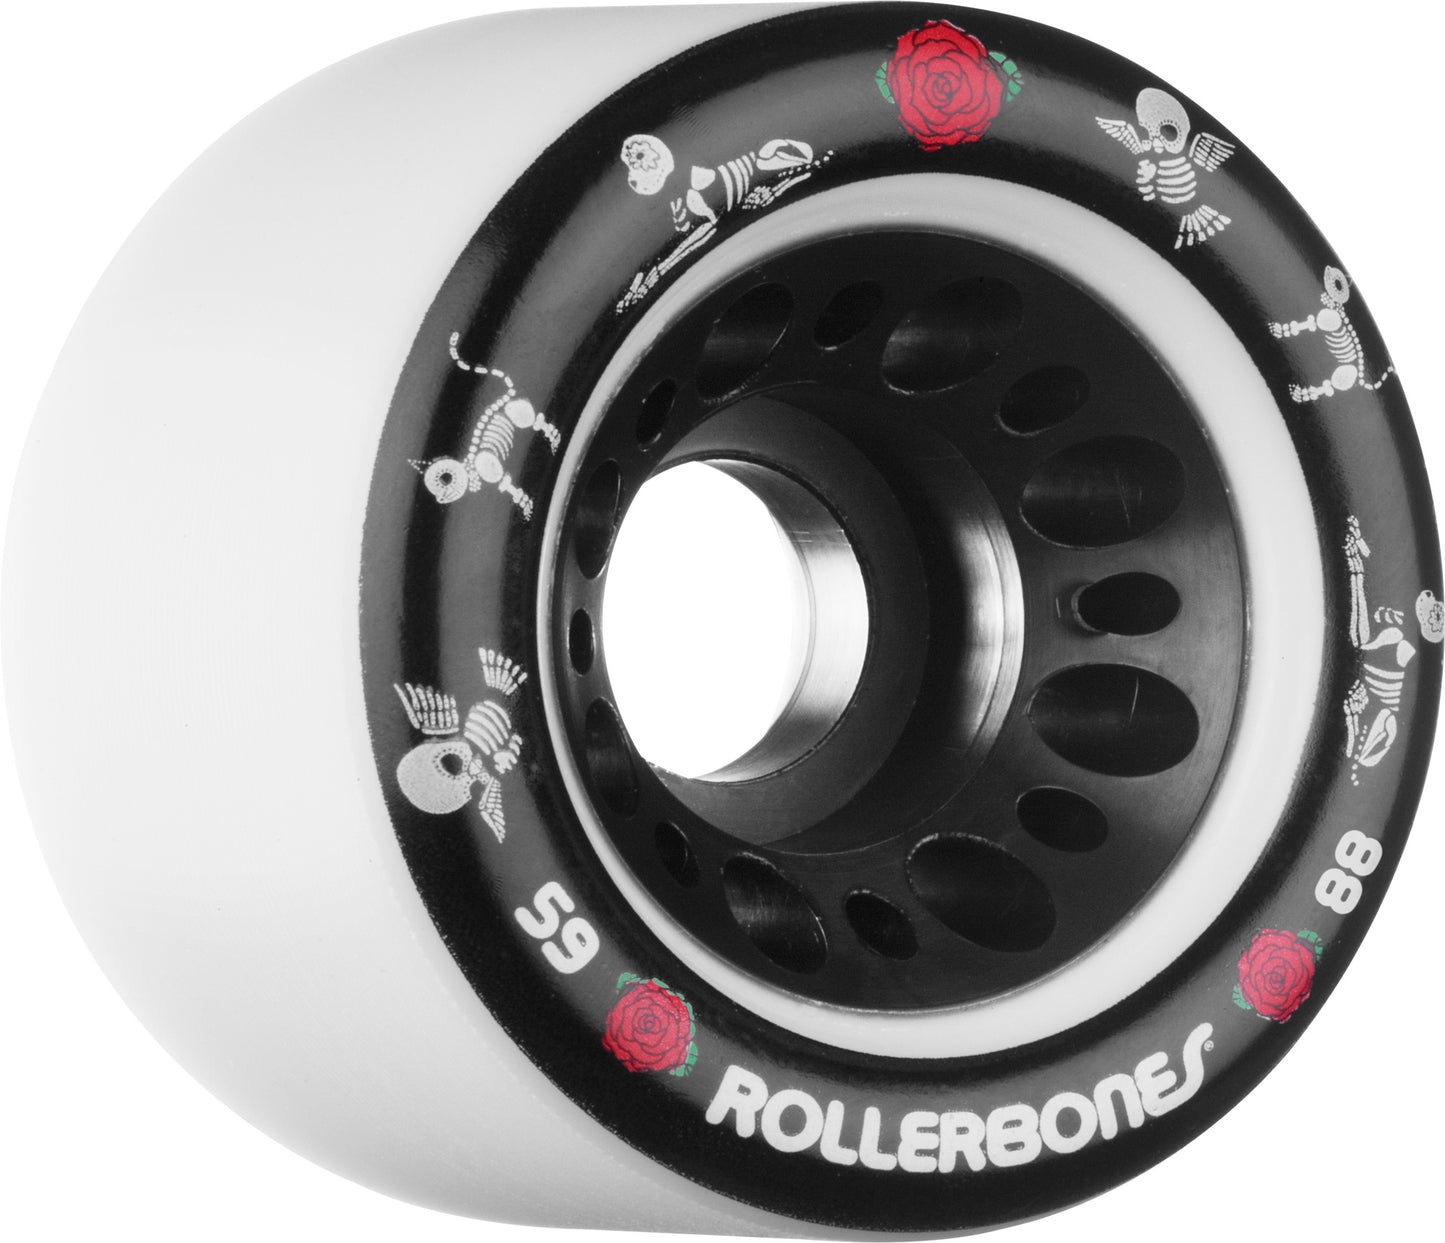 ROLLERBONES PET DAY OF THE DEAD WHEELS59mm x 88a (8-PACK)